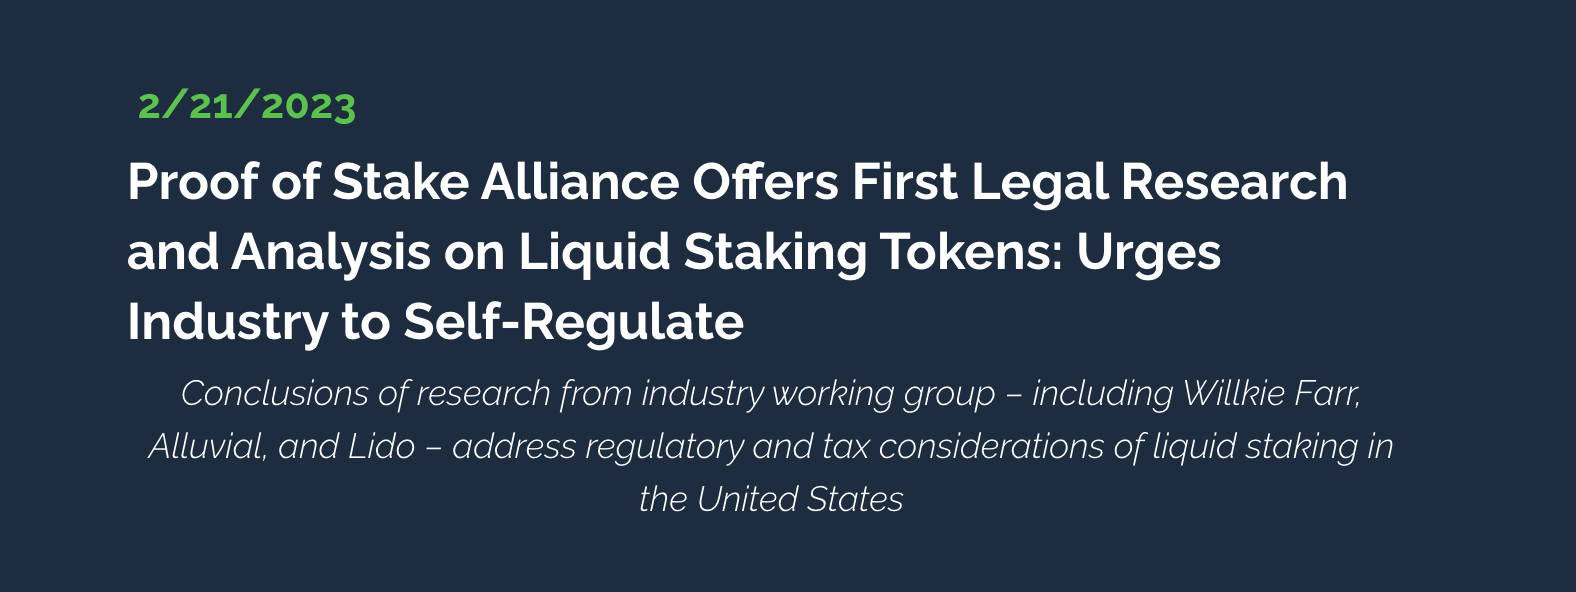 Proof of Stake Alliance (POSA): Proof of Stake Alliance Offers First Legal Research and Analysis on Liquid Staking Tokens: Urges Industry to Self-Regulate 